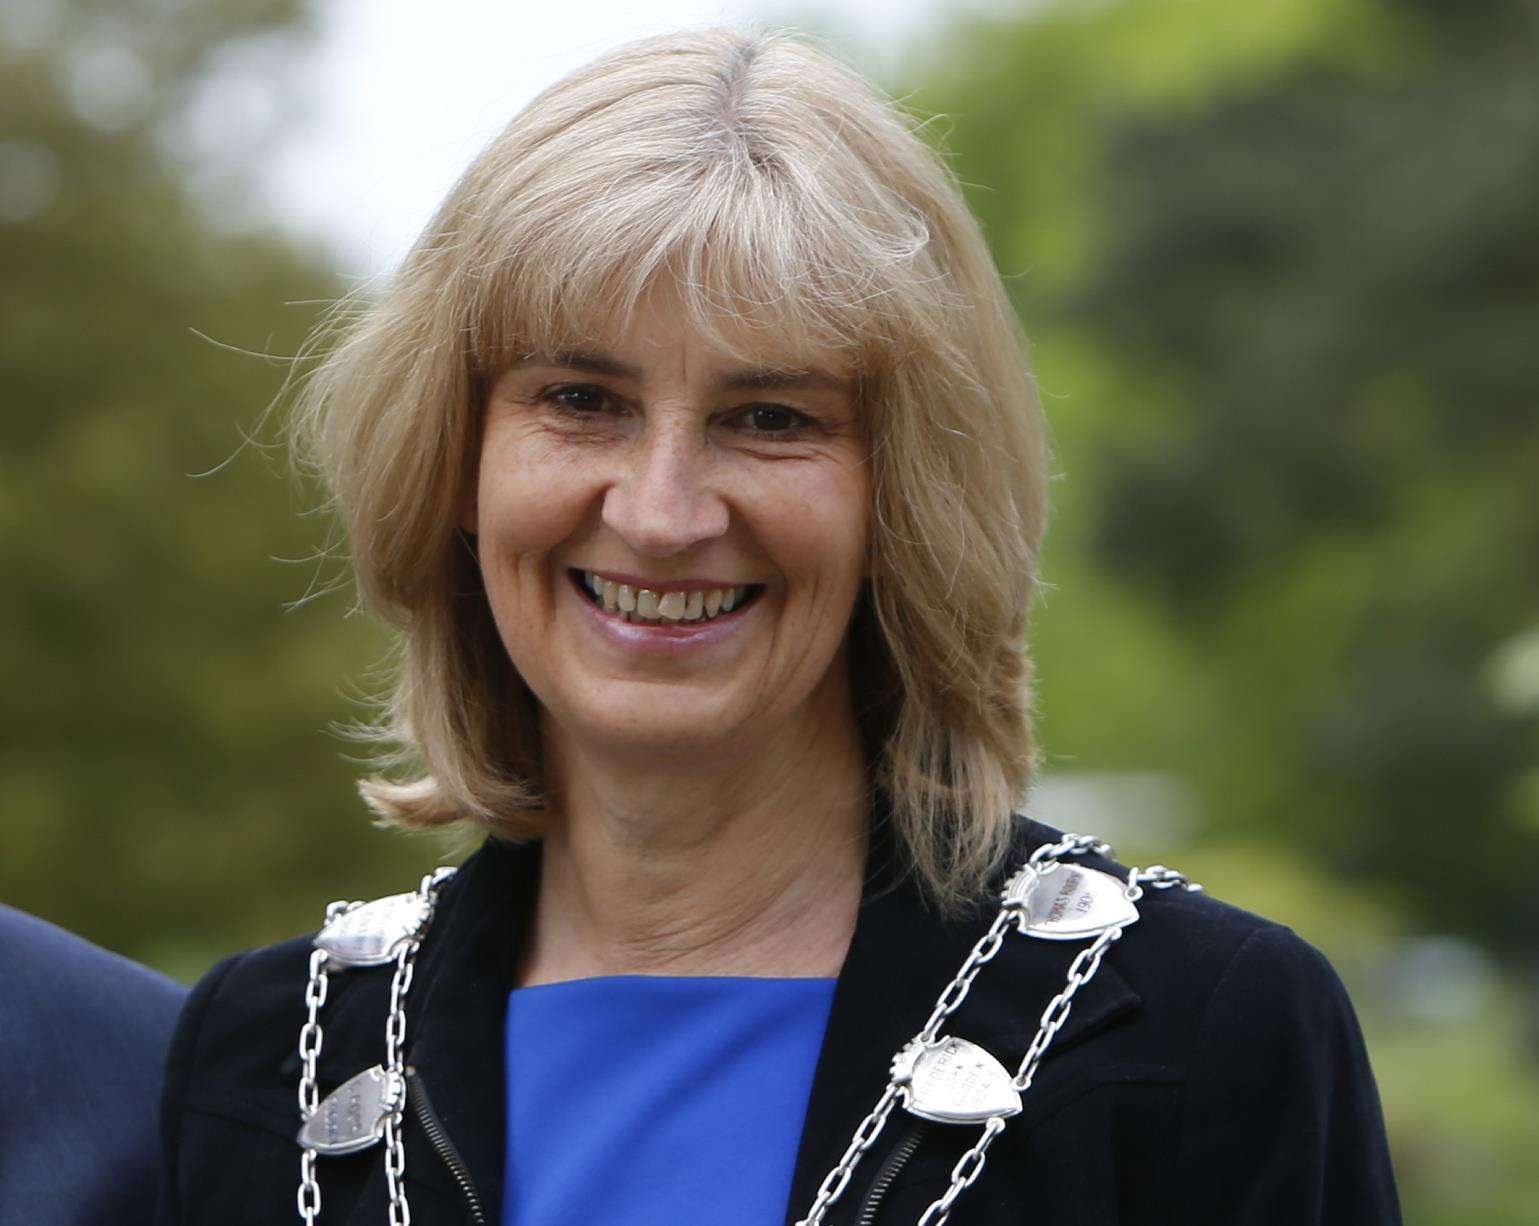 City councillor Jeanette Stockley